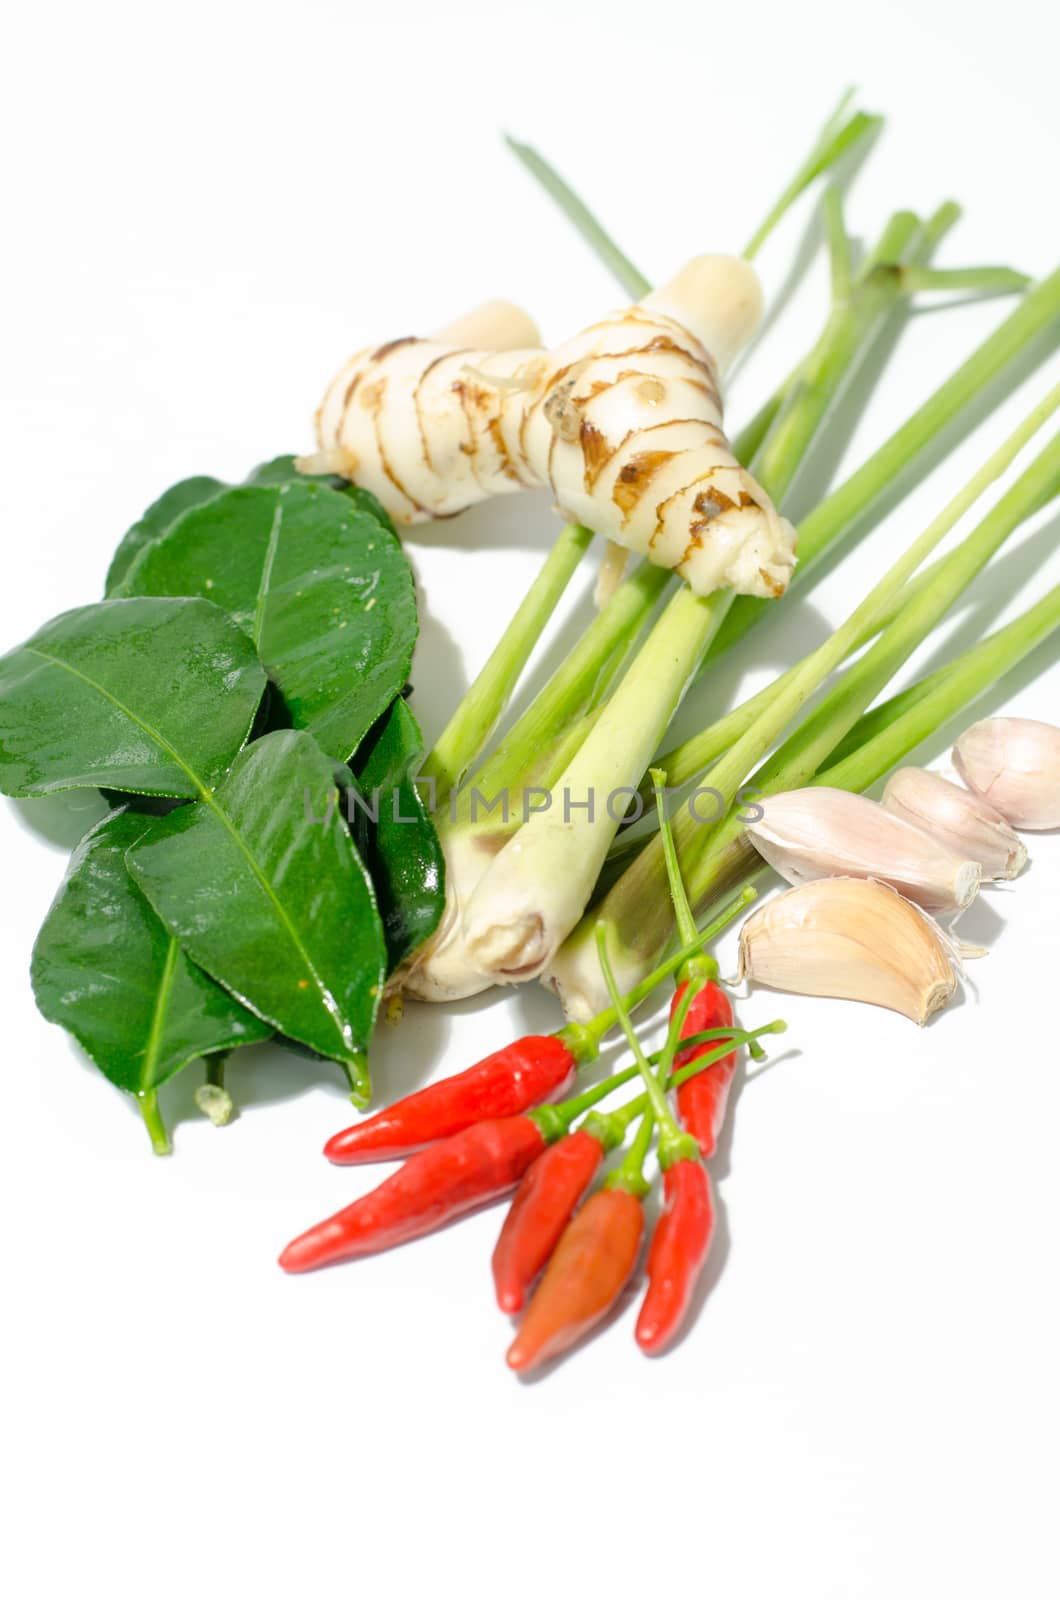 Herbs and spices set to make tom yum spicy soup